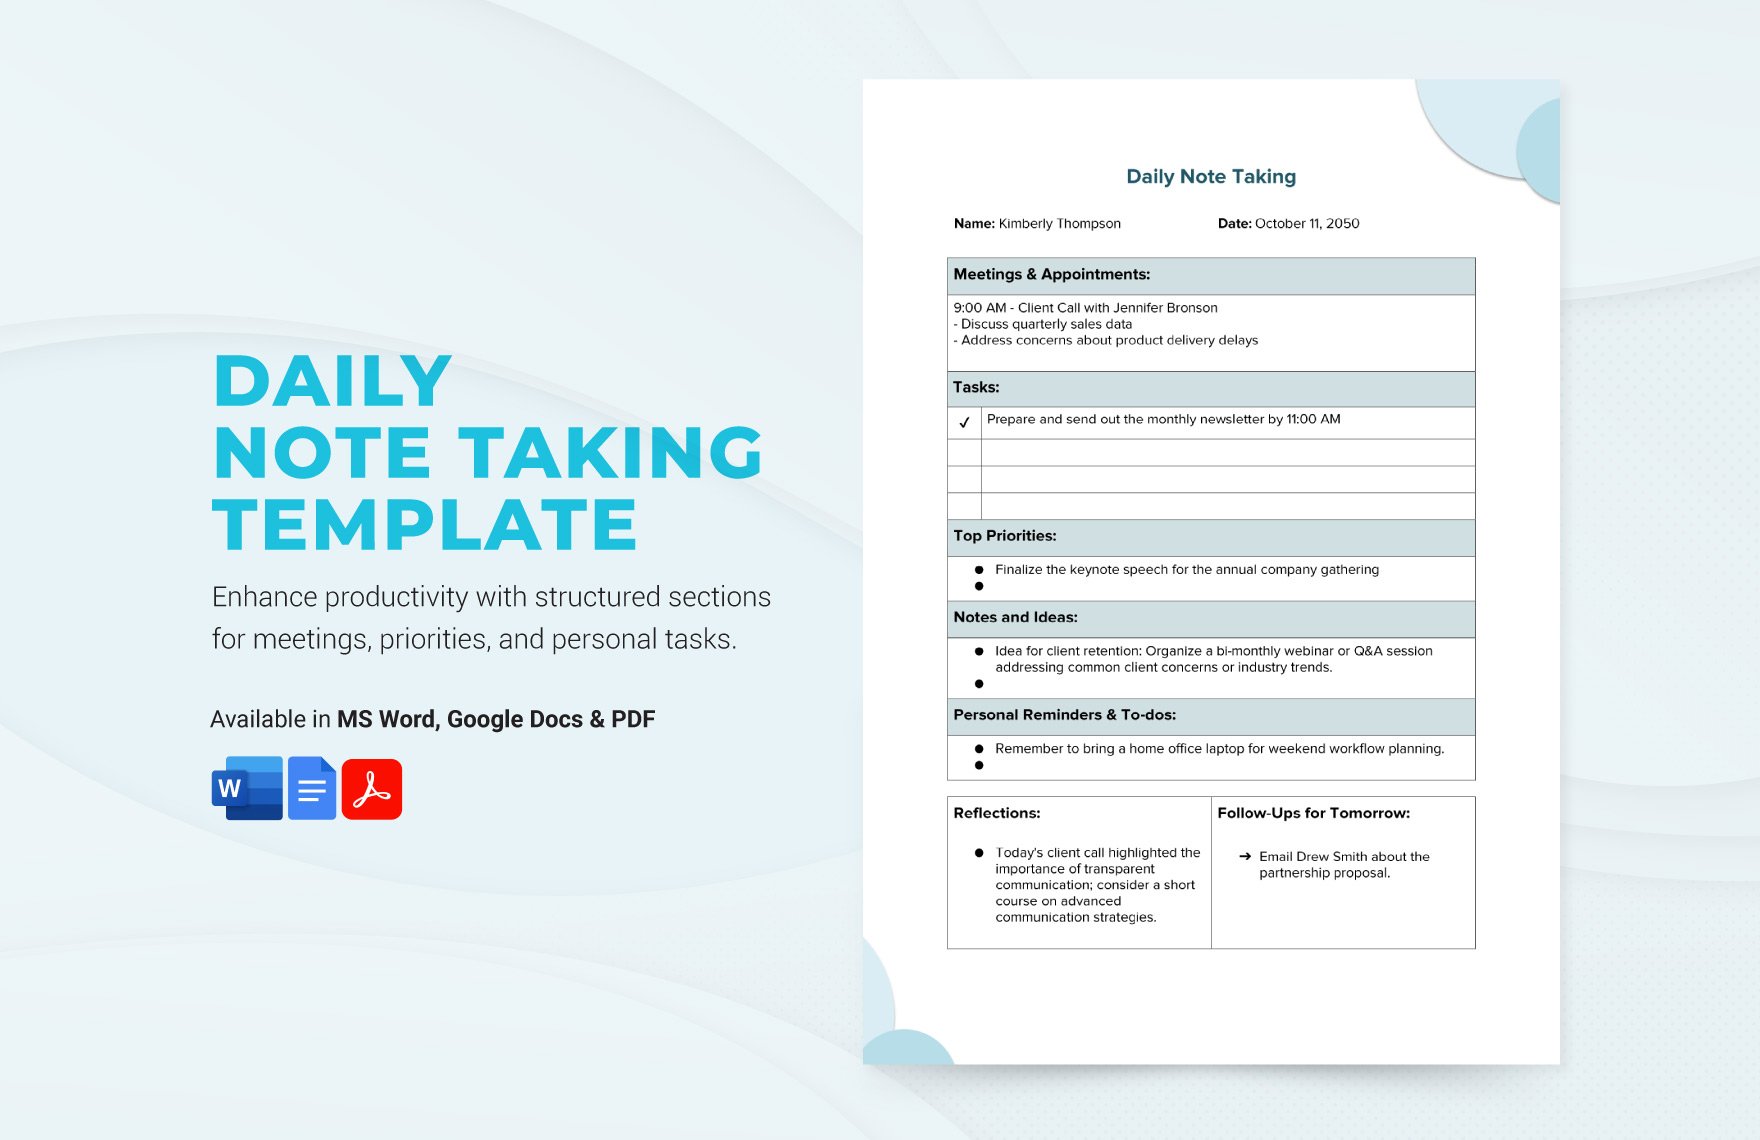 Daily Note Taking Template